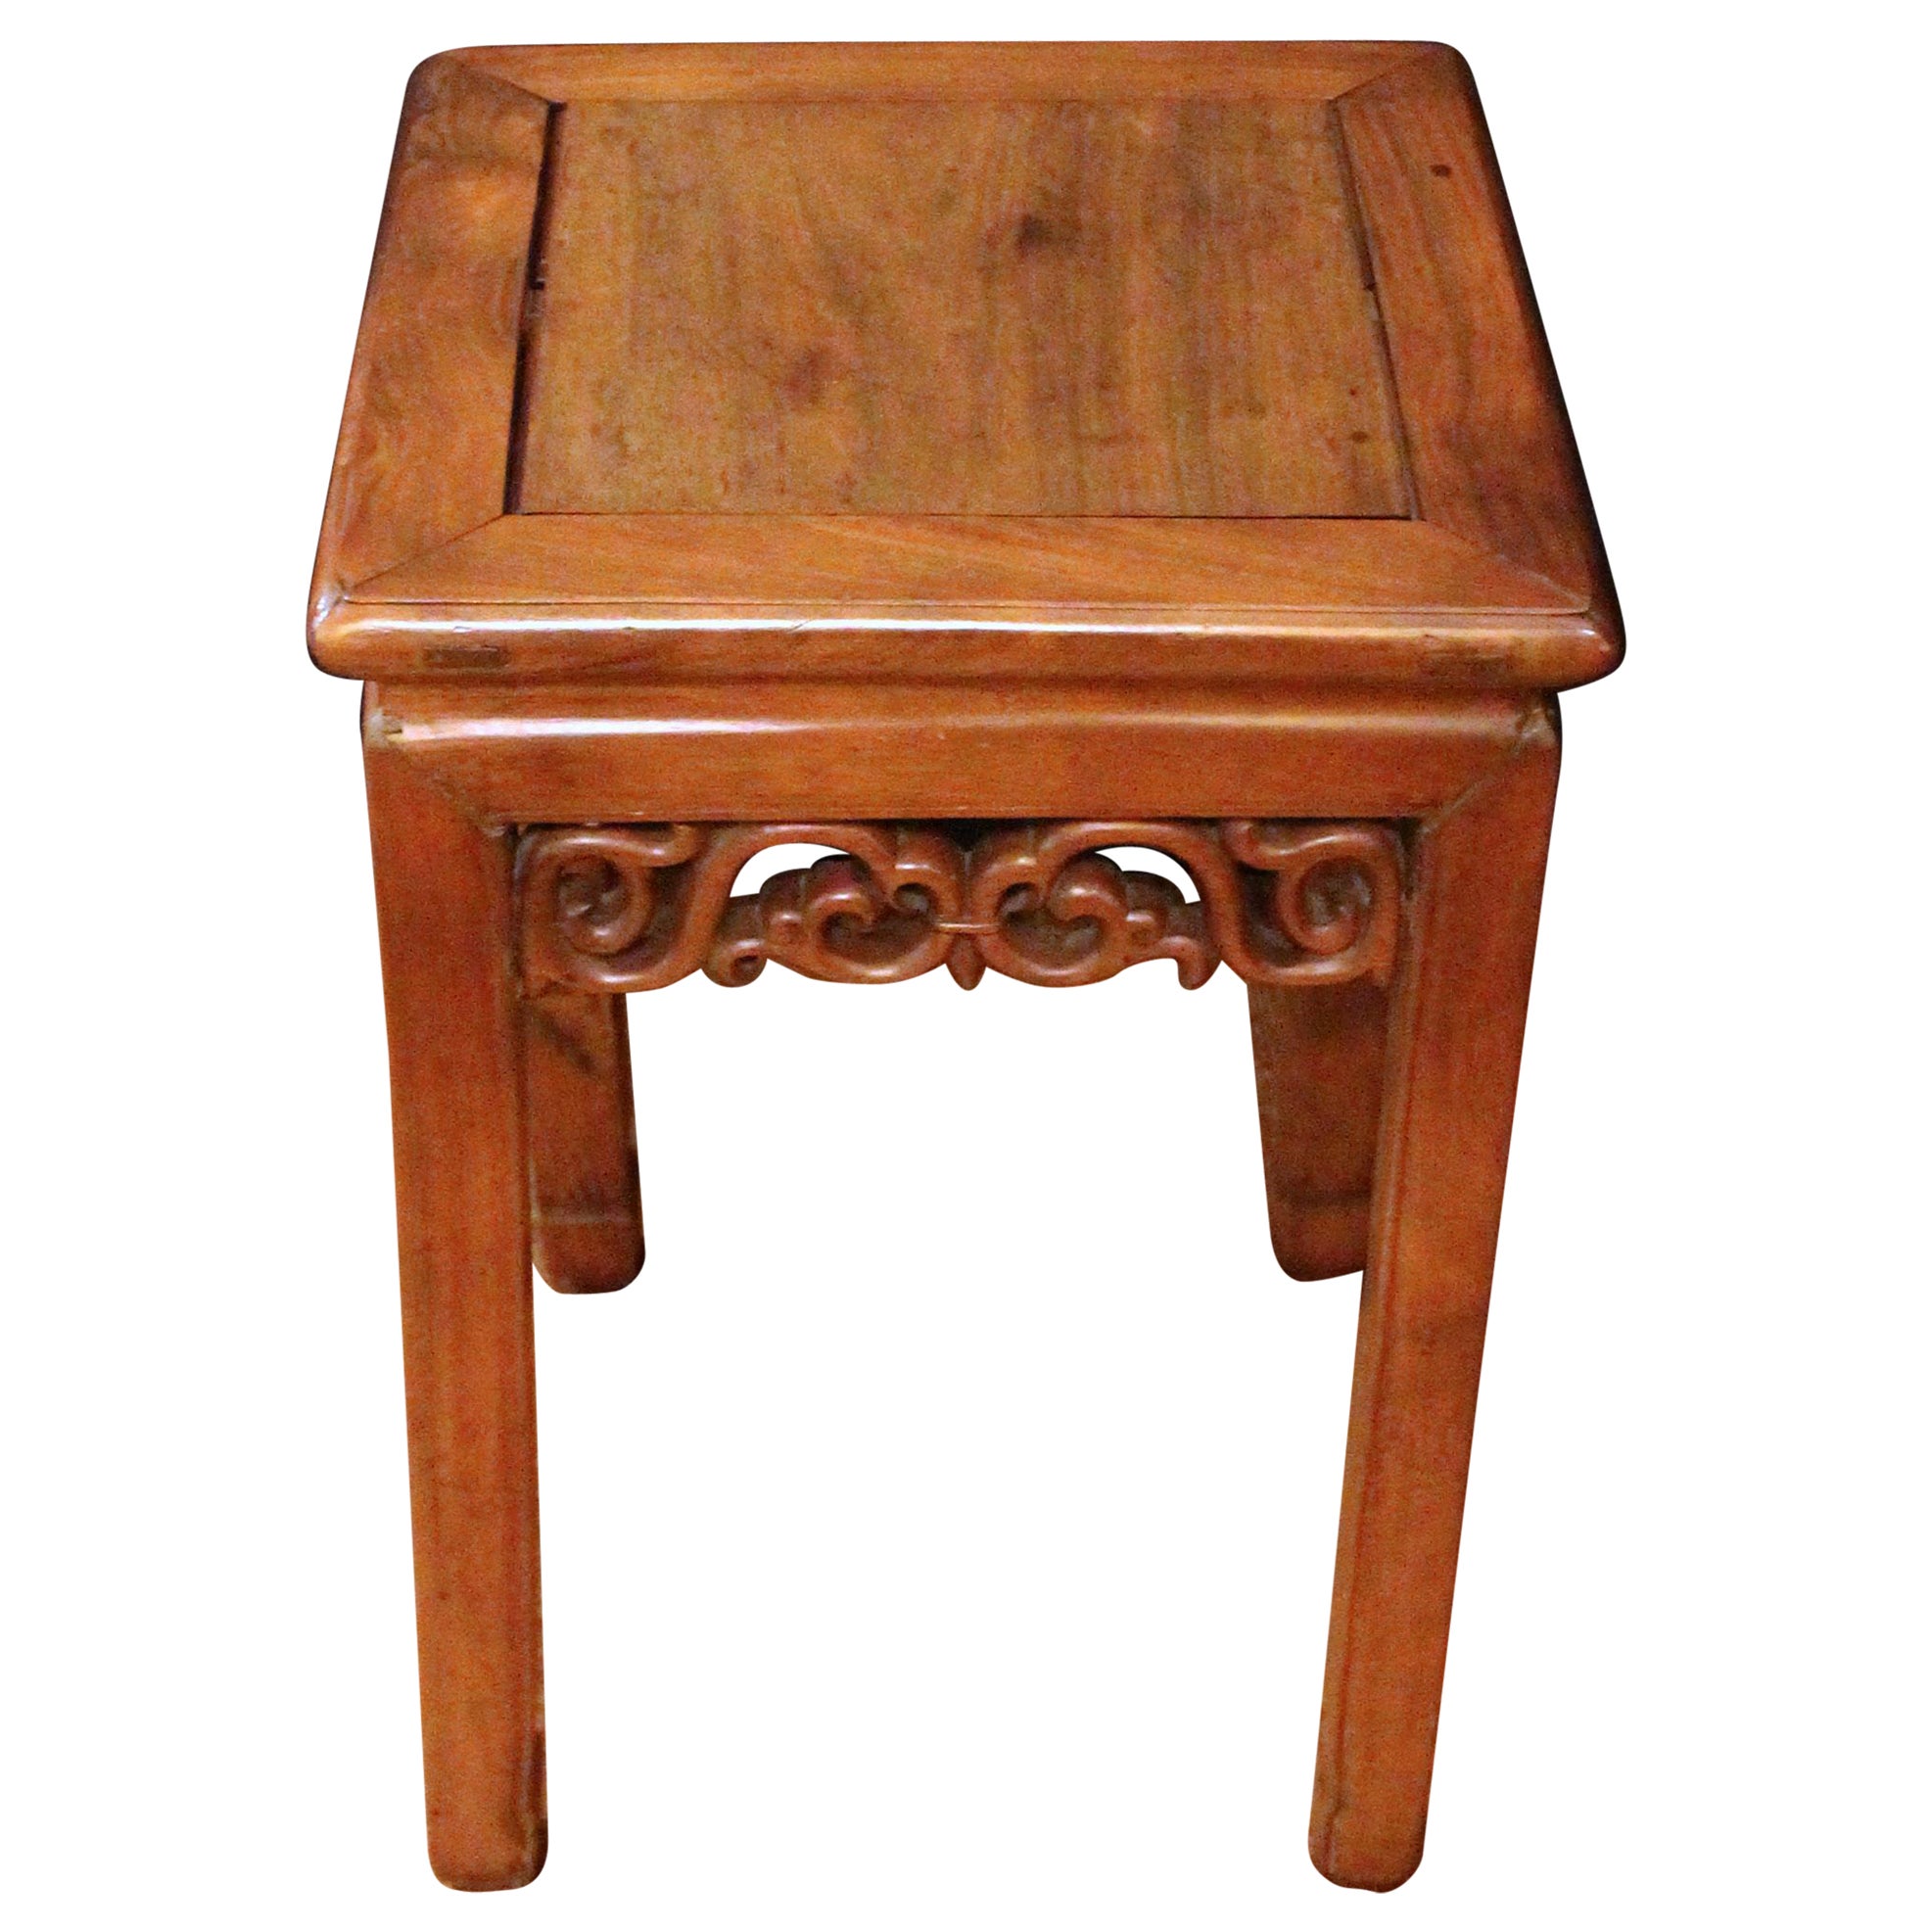 Late 19th Century Teak Taboret Table For Sale